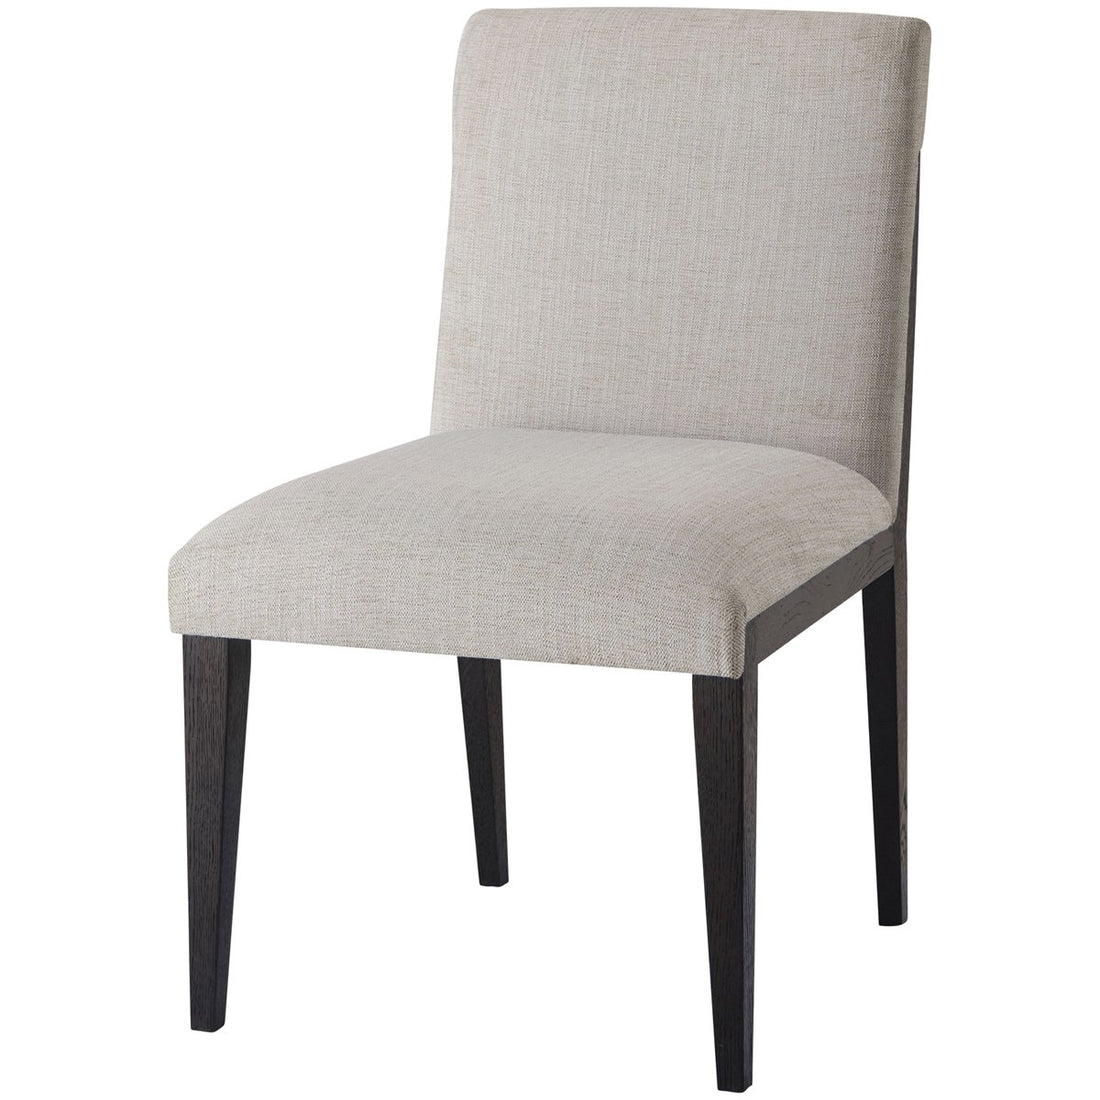 Theodore Alexander Vree Dining Side Chair, Set of 2